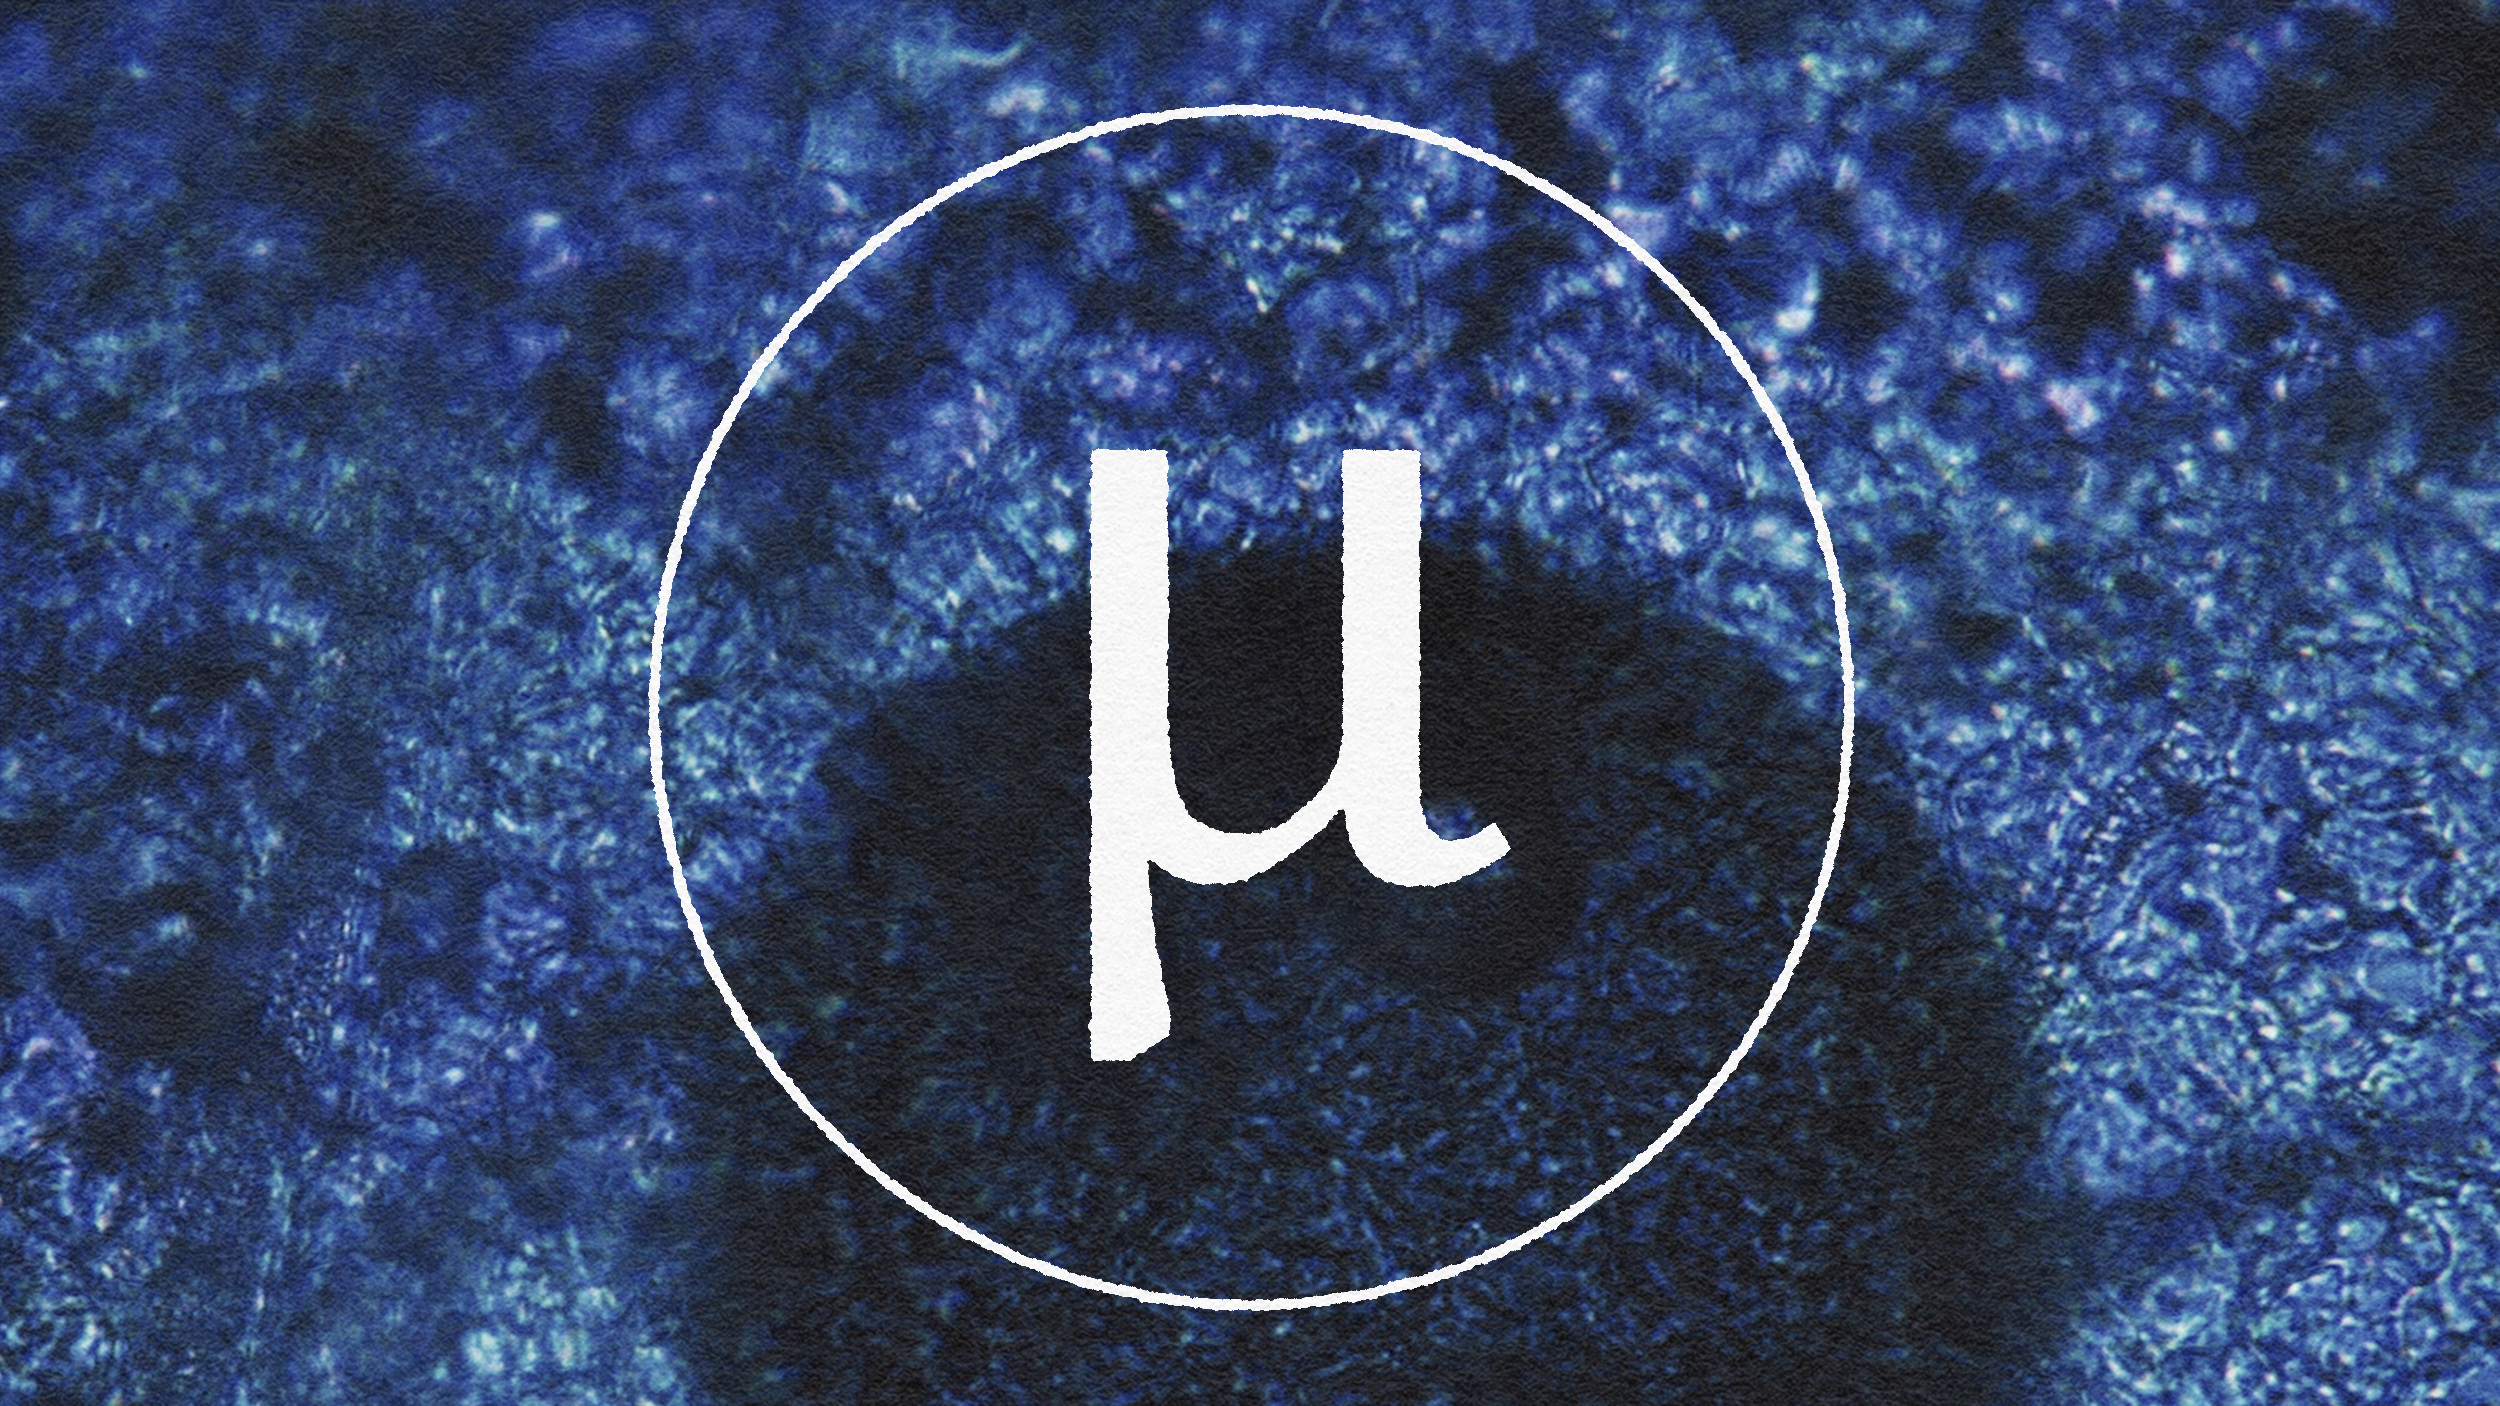 The letter j on a blue background.